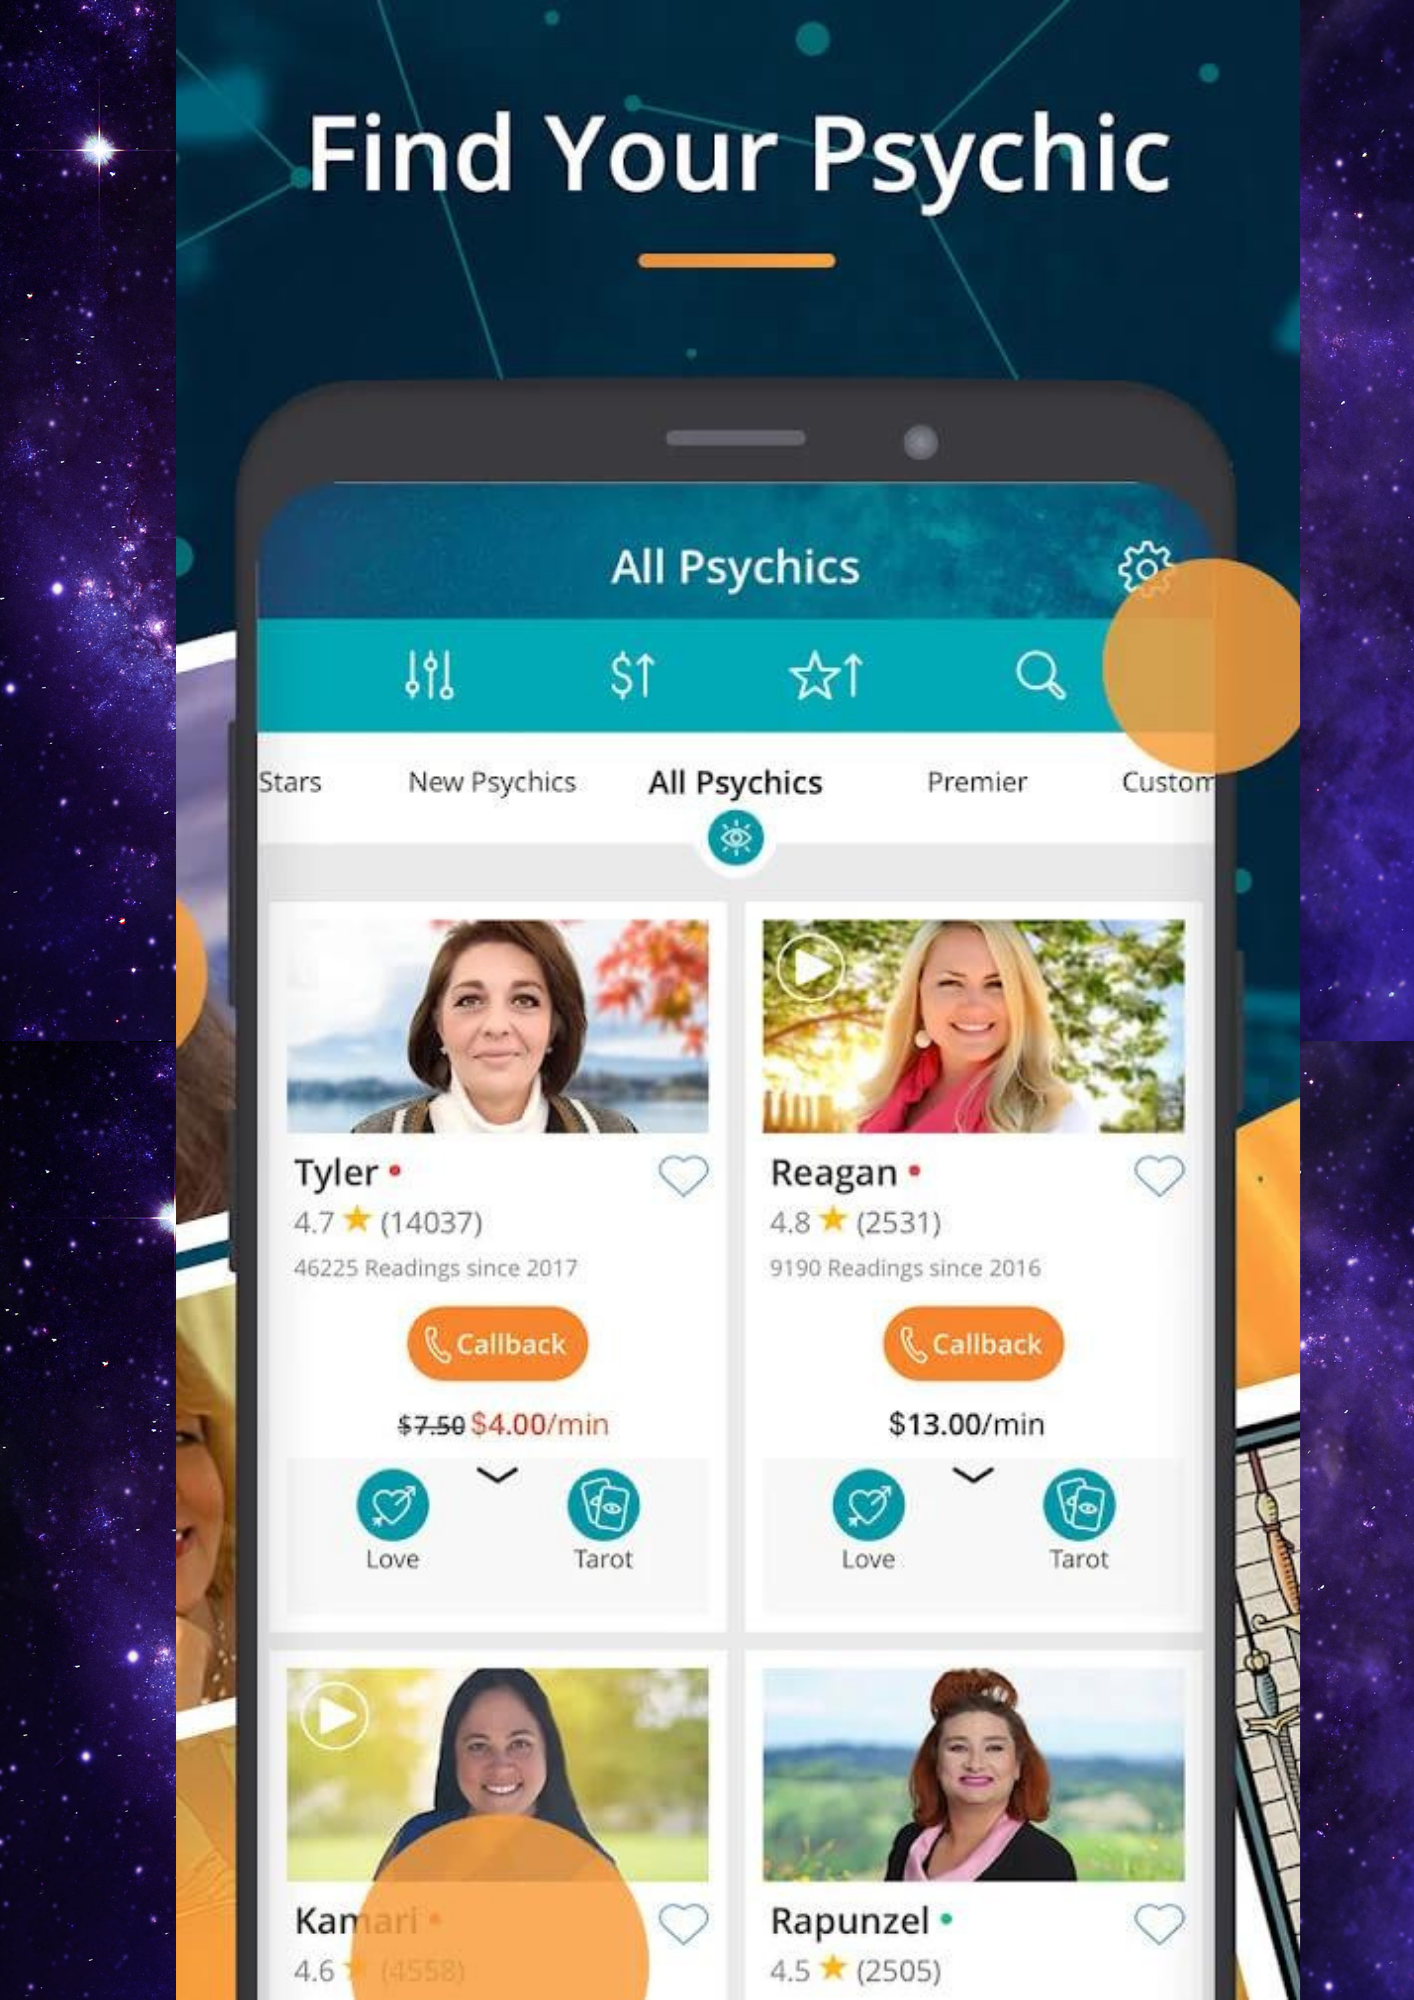 A phone showing different psychics profile on the screen with words find your psychic